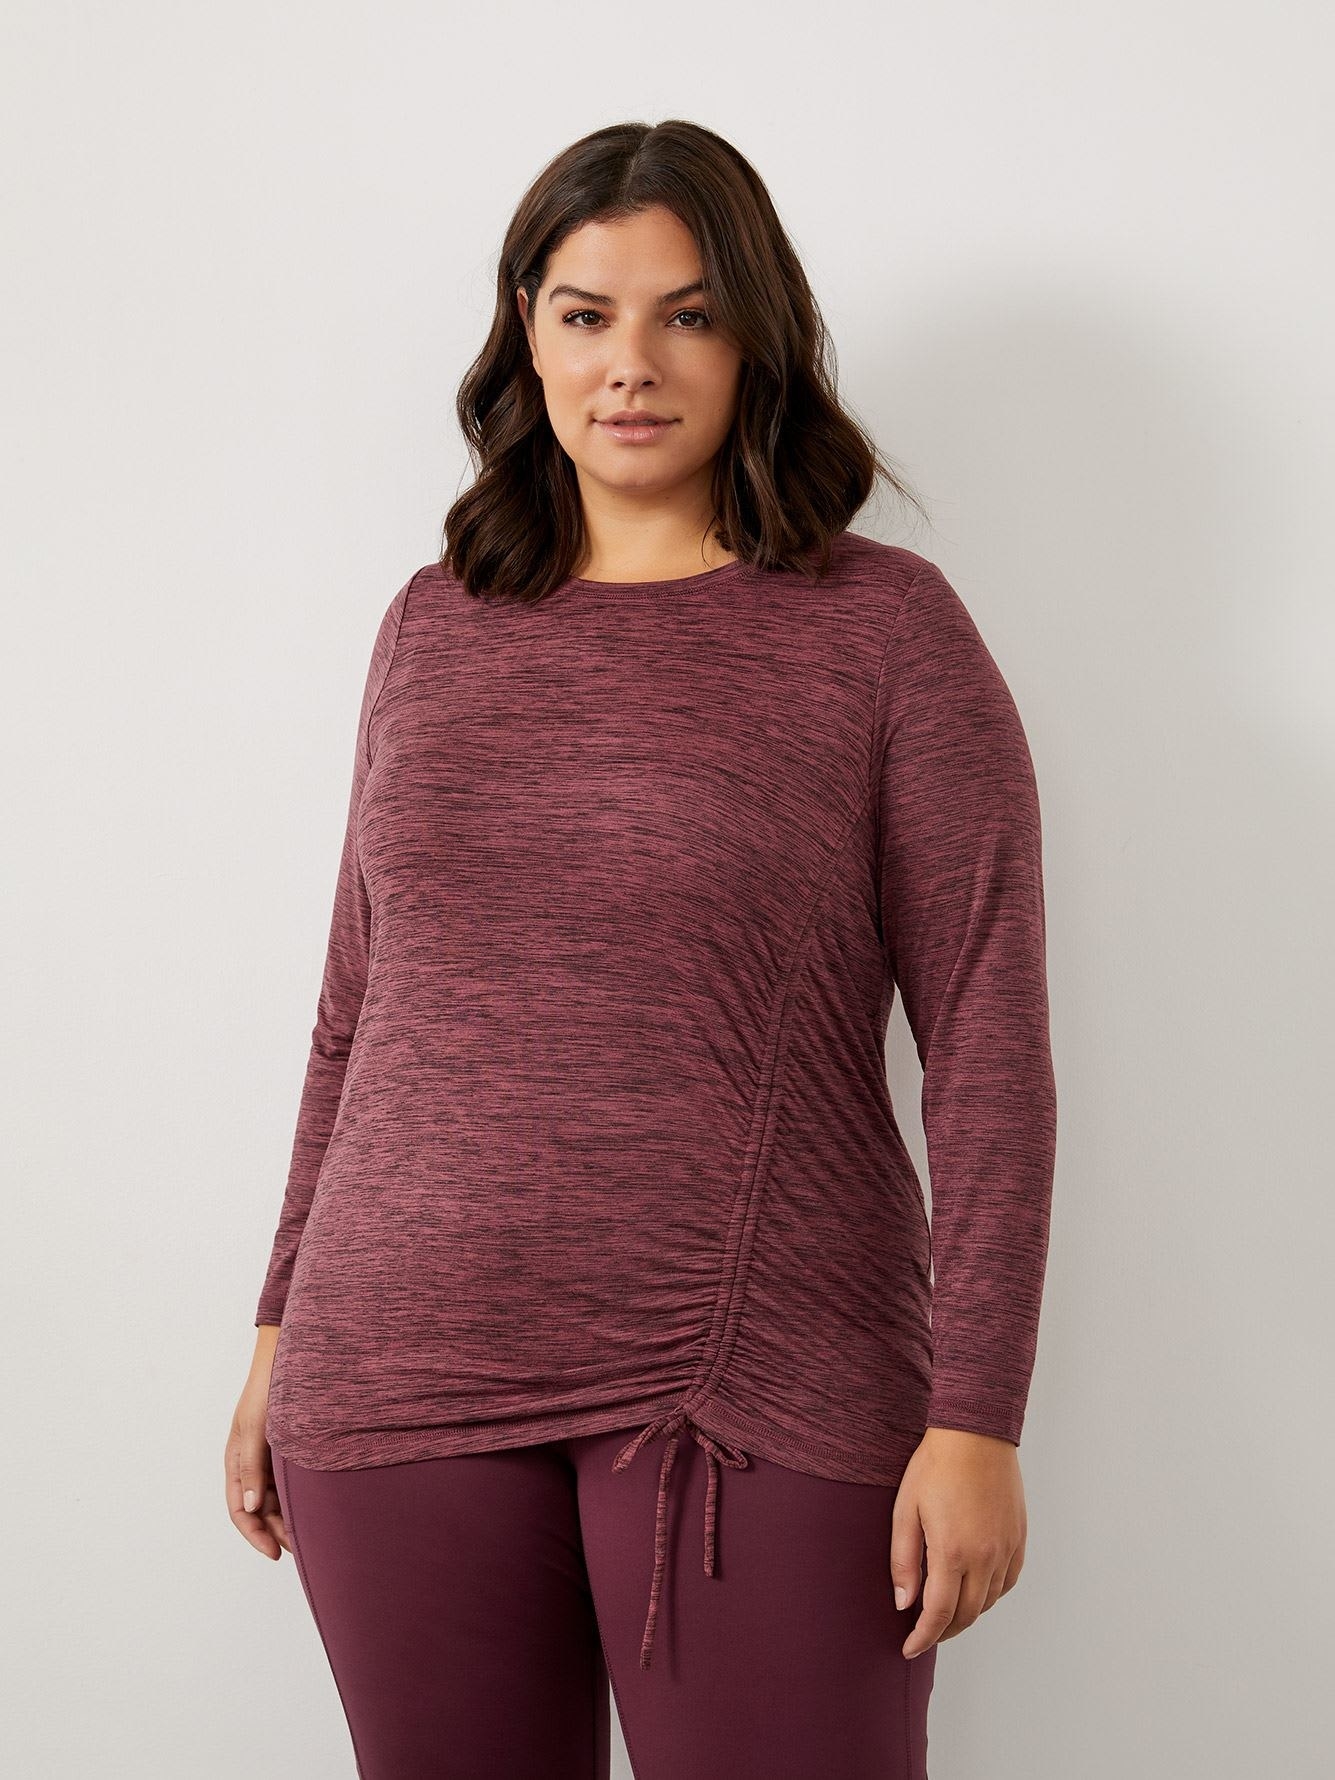 Plus Size Workout Clothes on